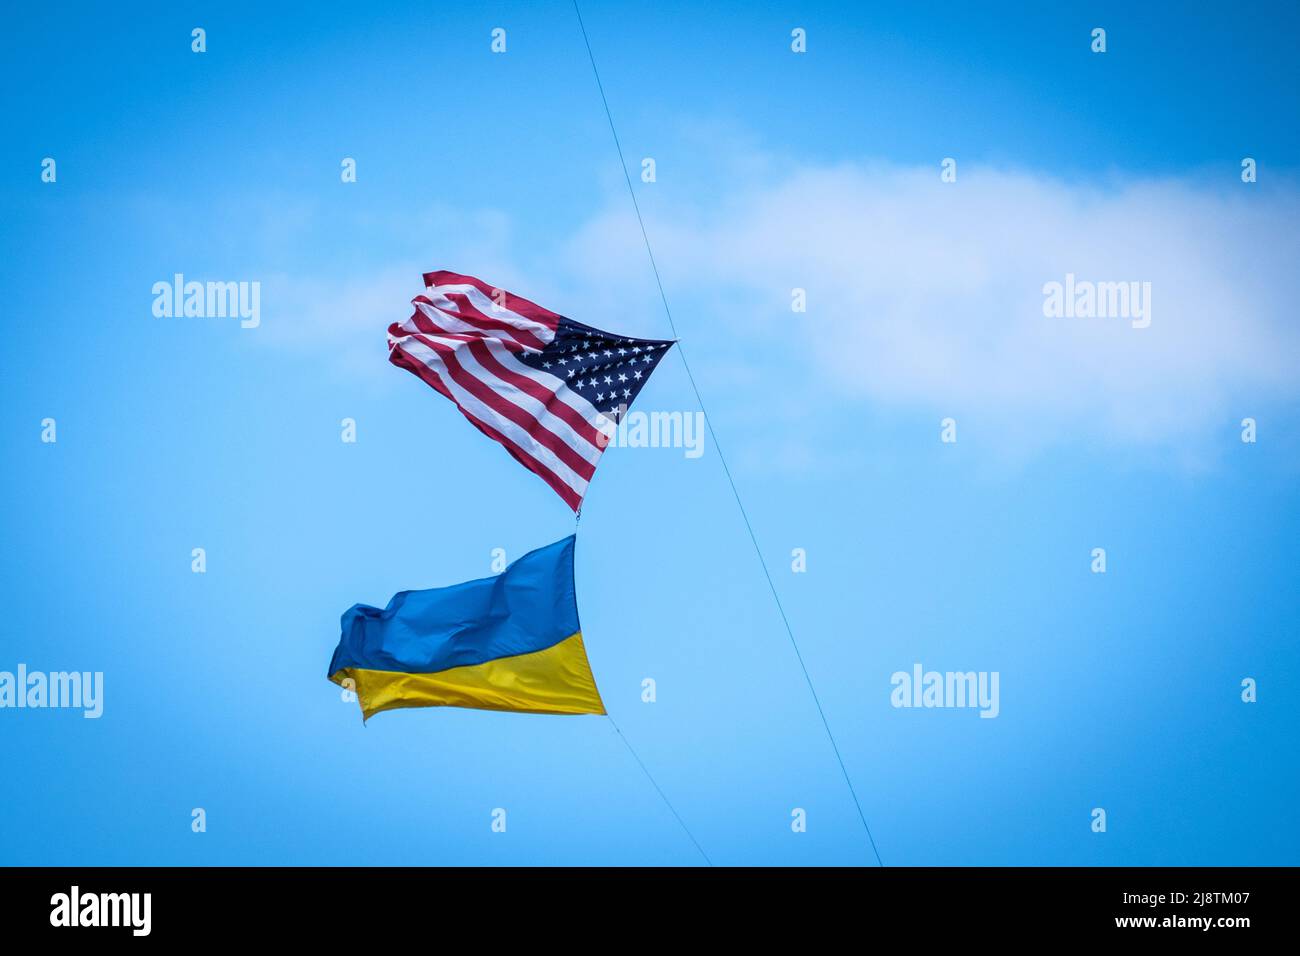 Support in the USA for Ukraine: American and Ukrainian flags fly from a kite tether, Salisbury, Massachusetts, USA. Stock Photo